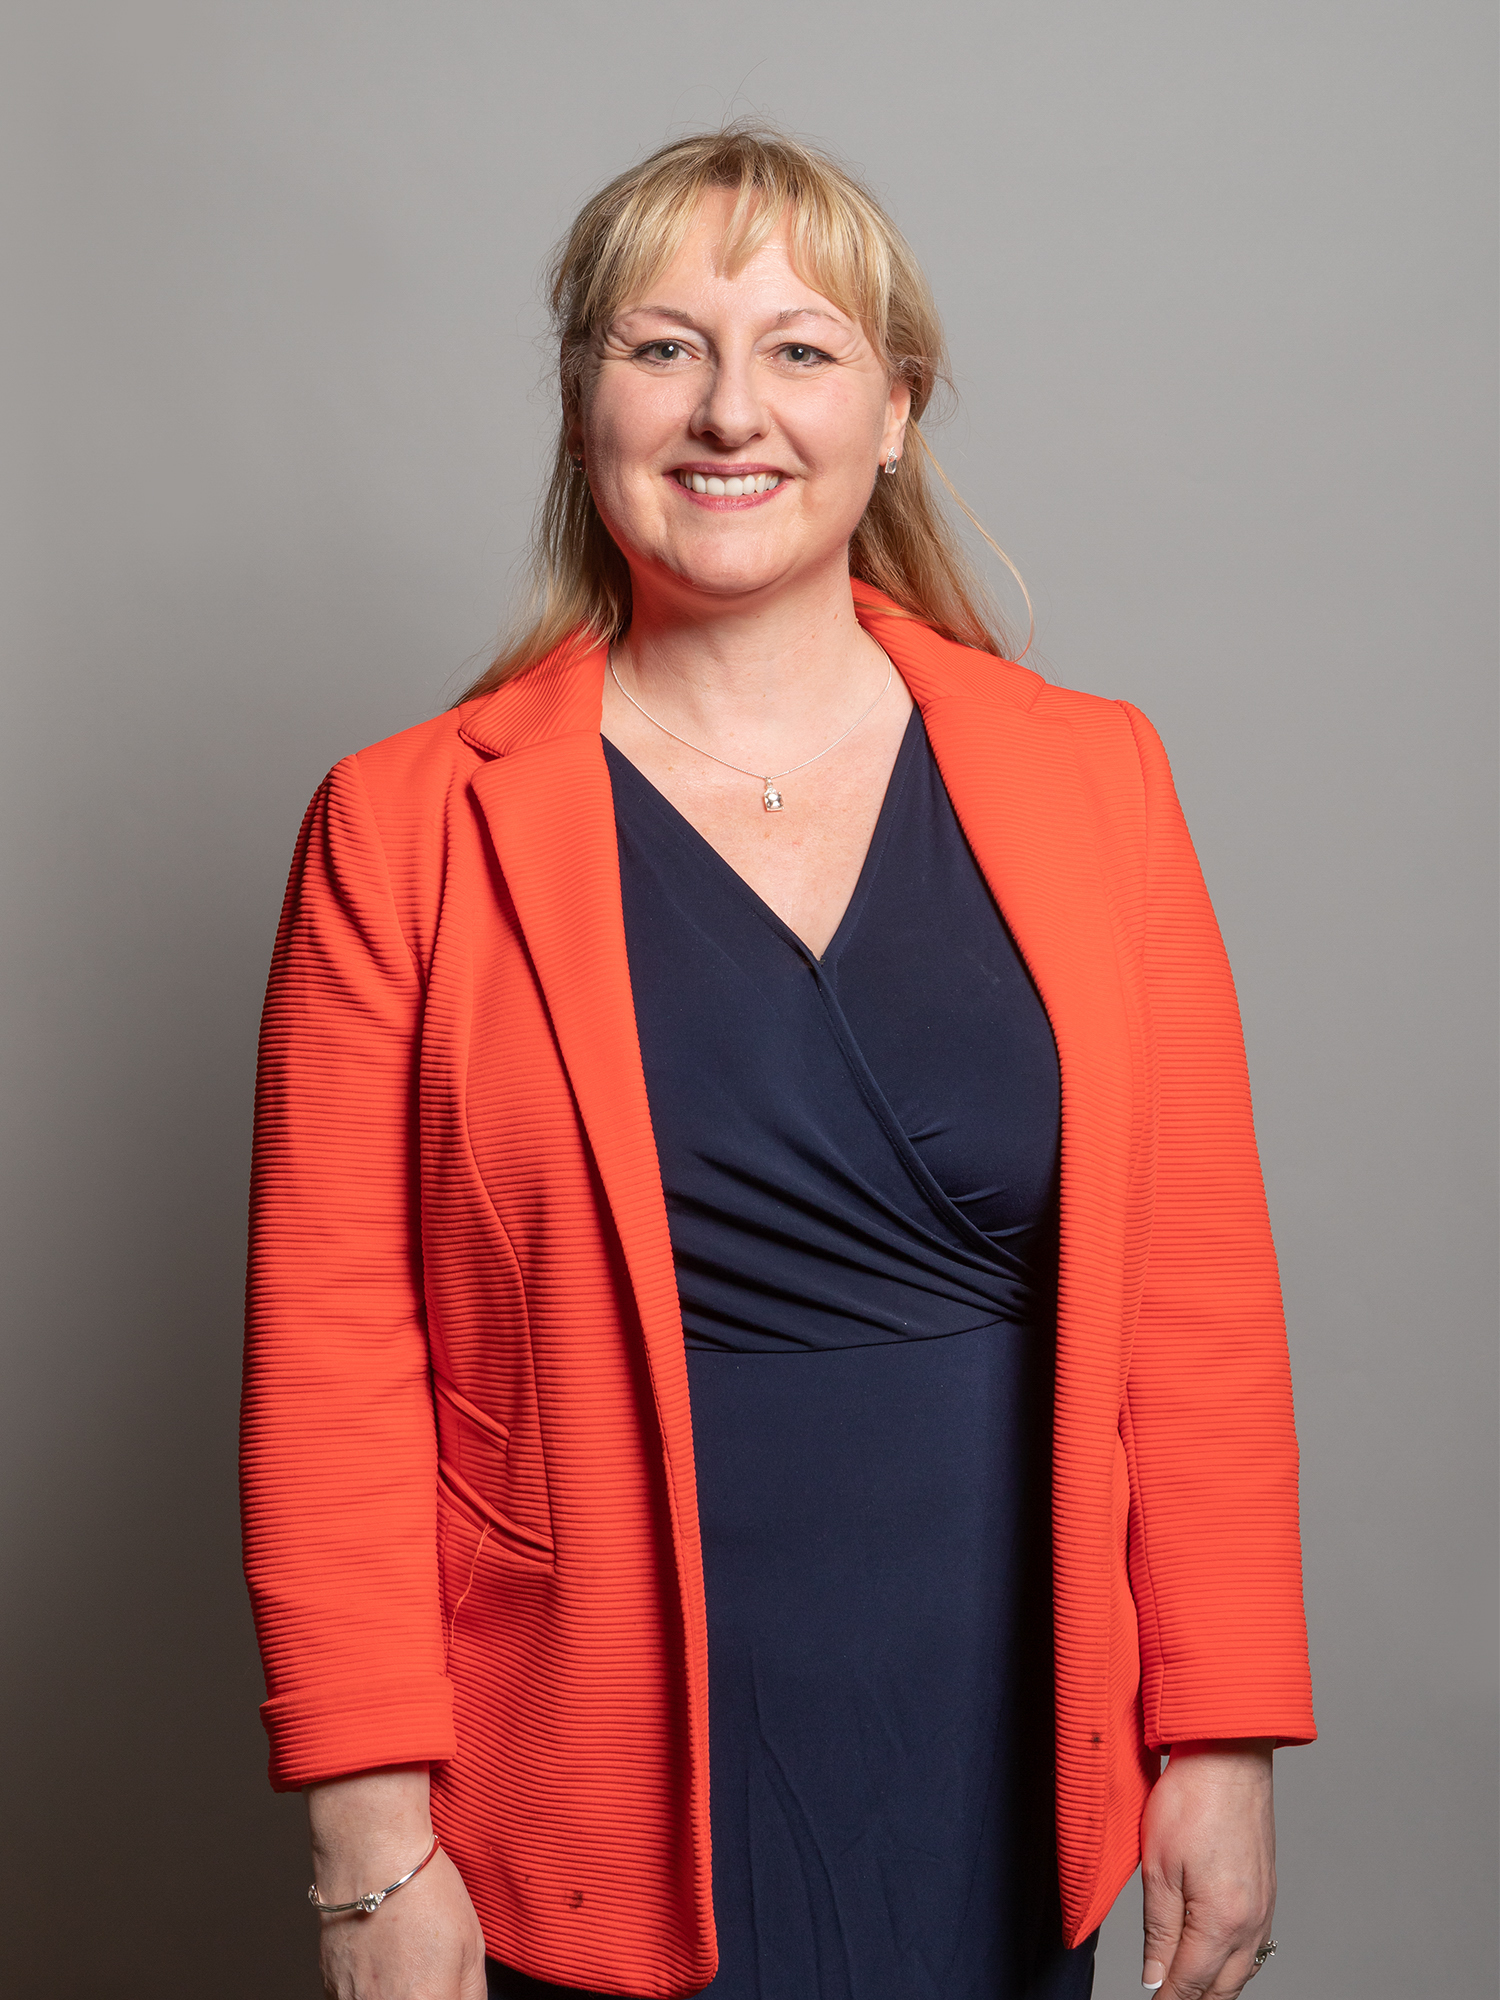 Lisa Cameron is the current MP for East Kilbride, Strathaven and Lesmahagow.